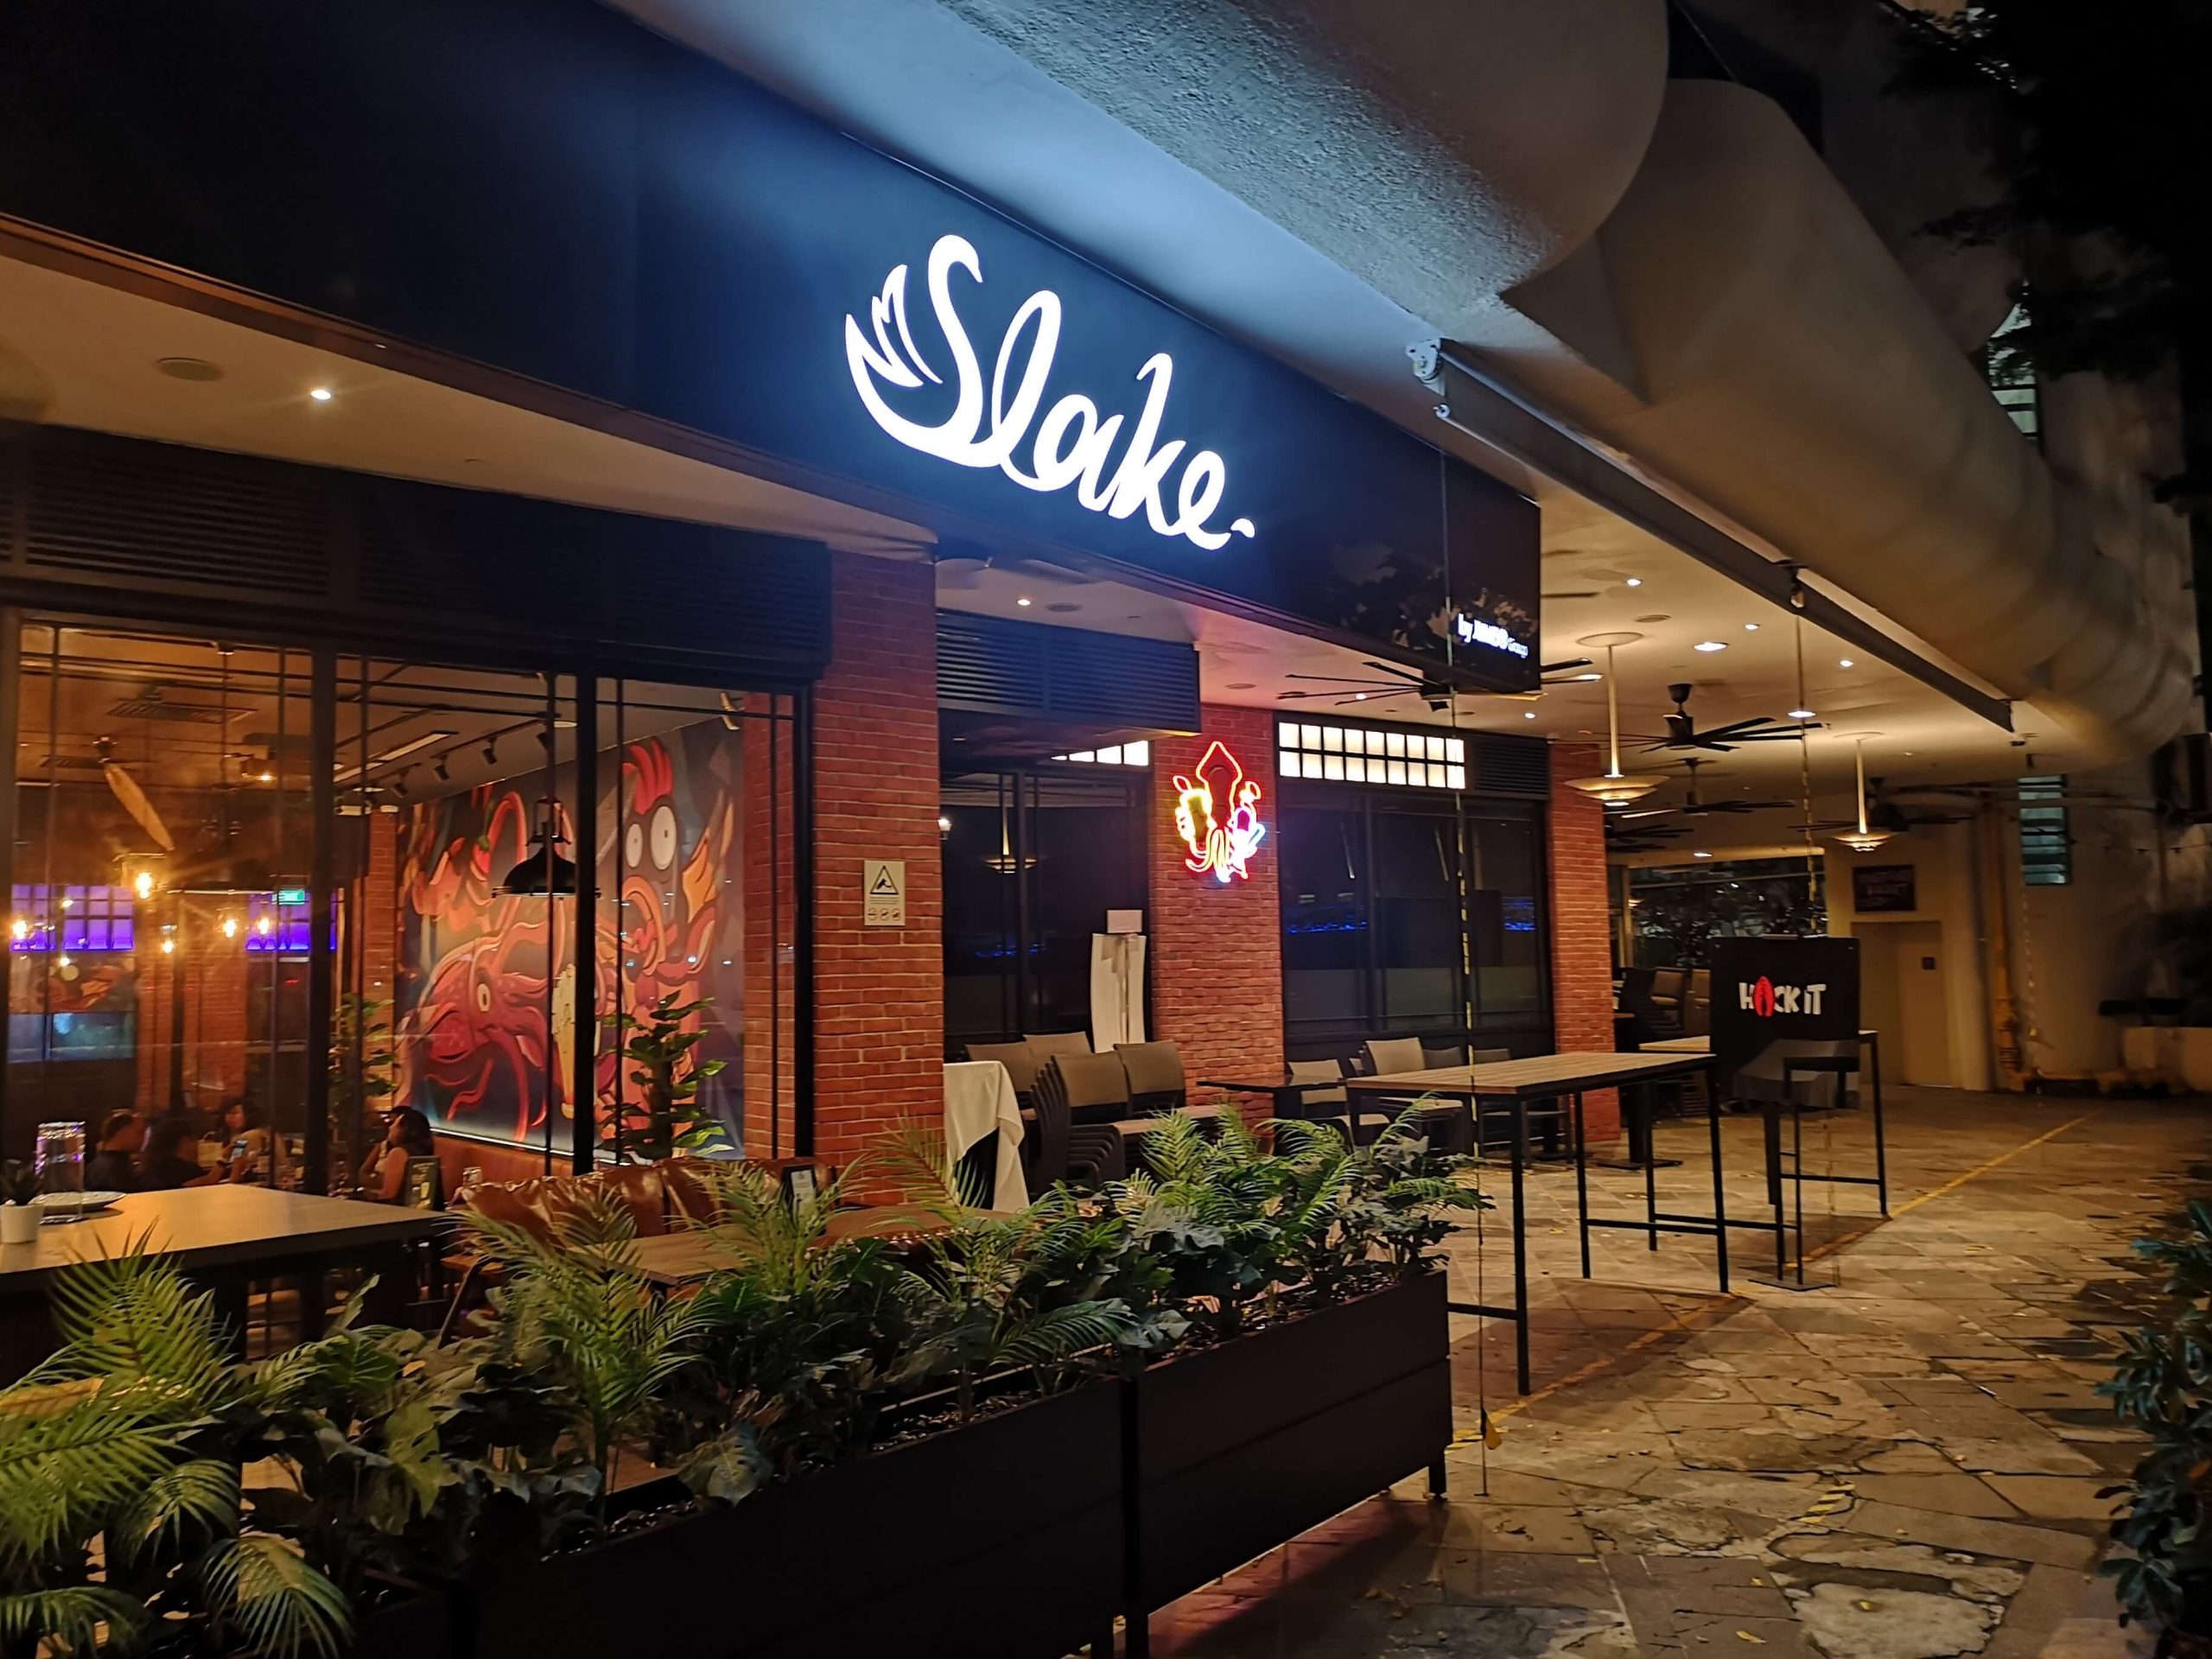 [CLOSED] Review: Slake, your neighbourhood gastrobar finding its way in the heart of the city